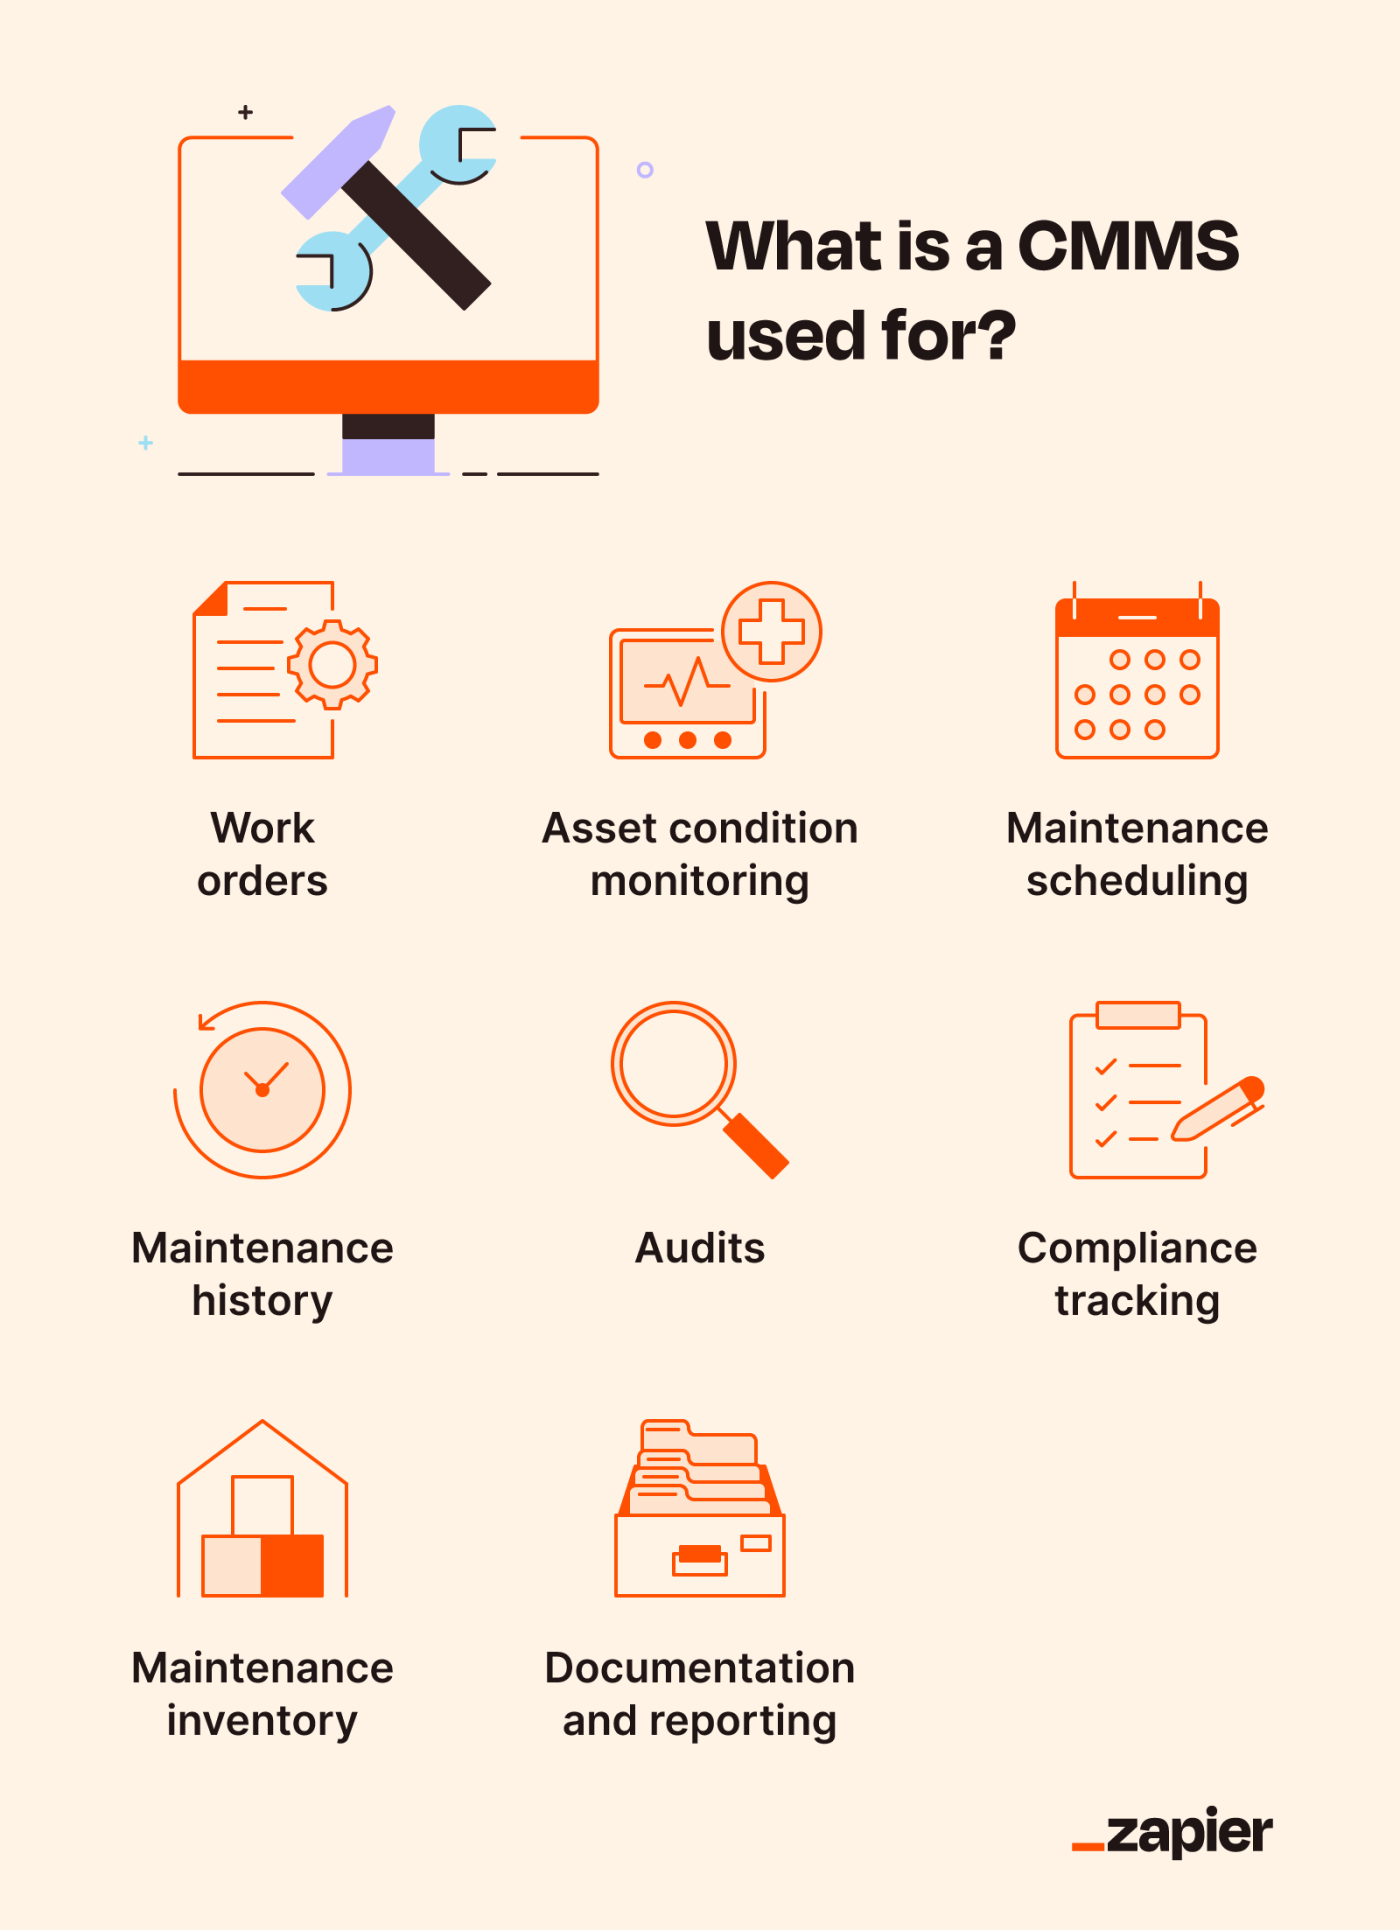 Icons illustrating some common uses of a CMMS